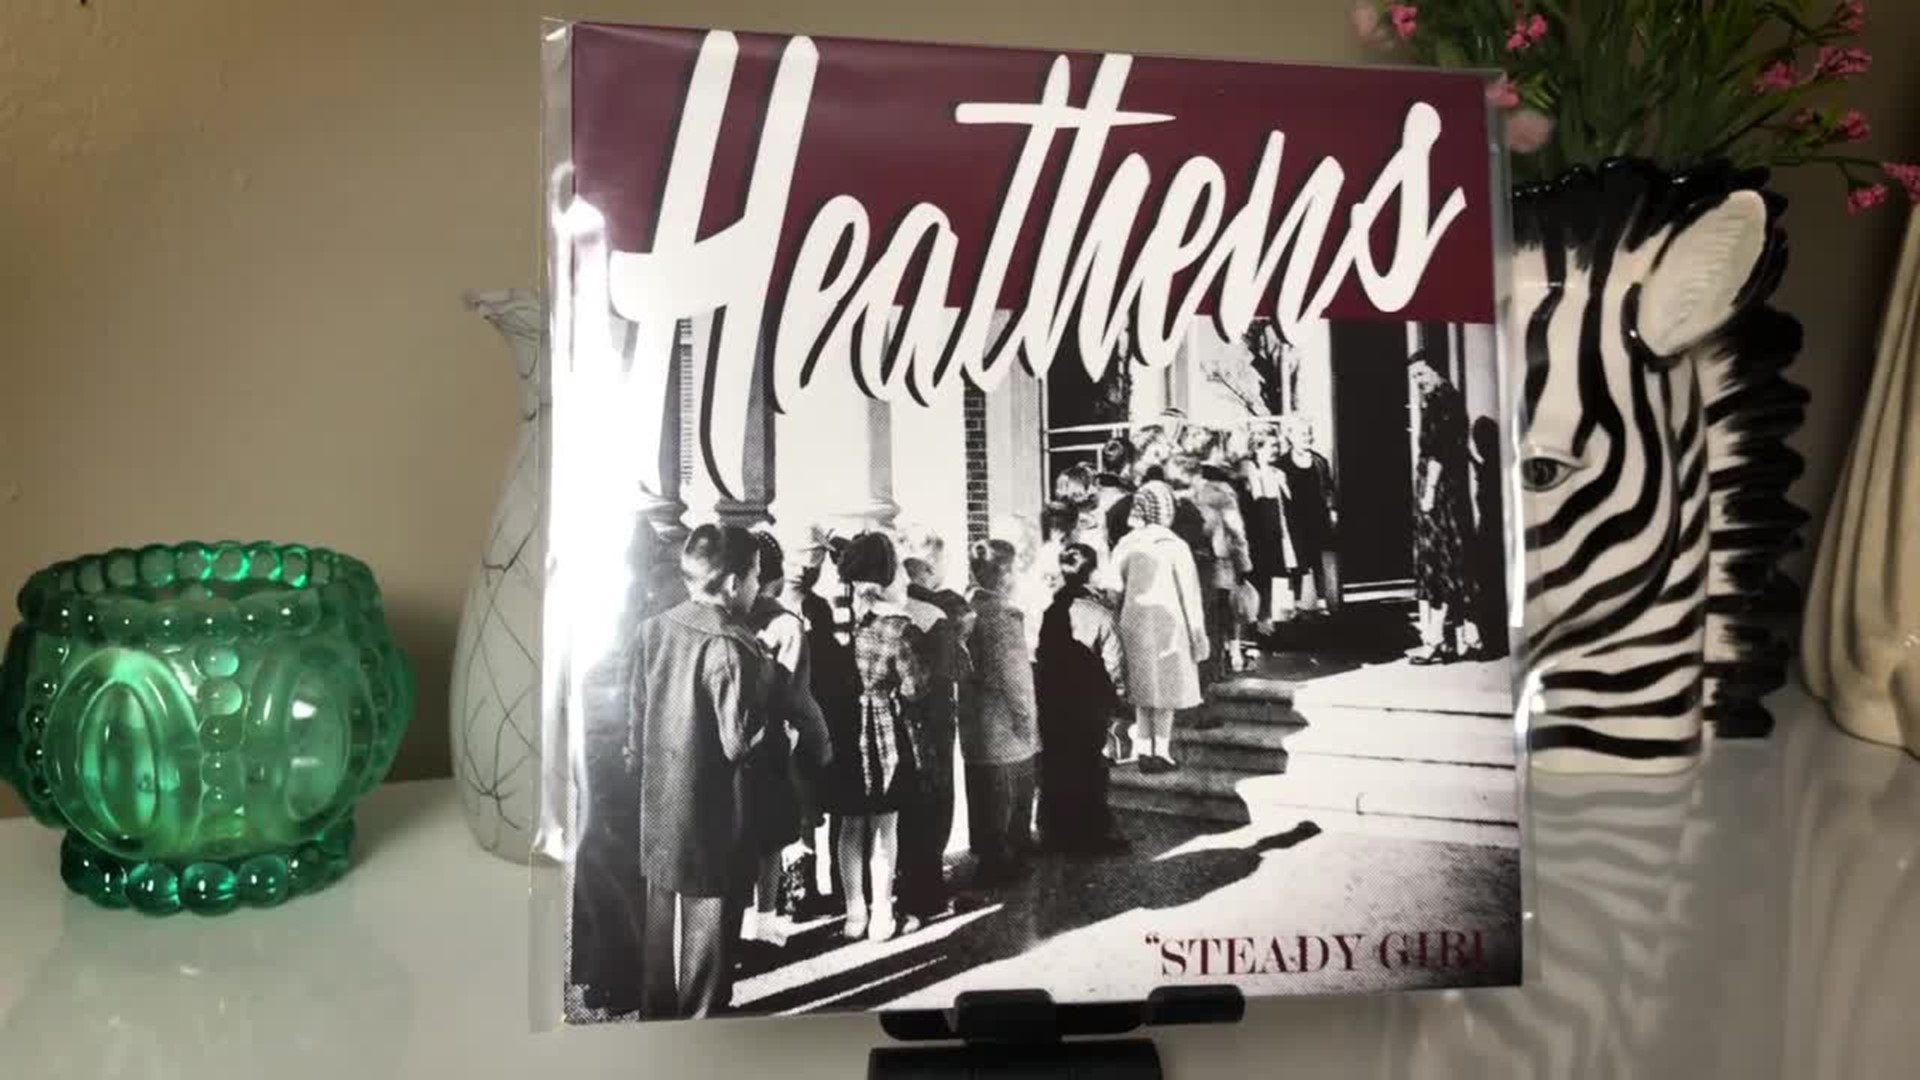 History Of Memphis-Based Band “The Heathens”